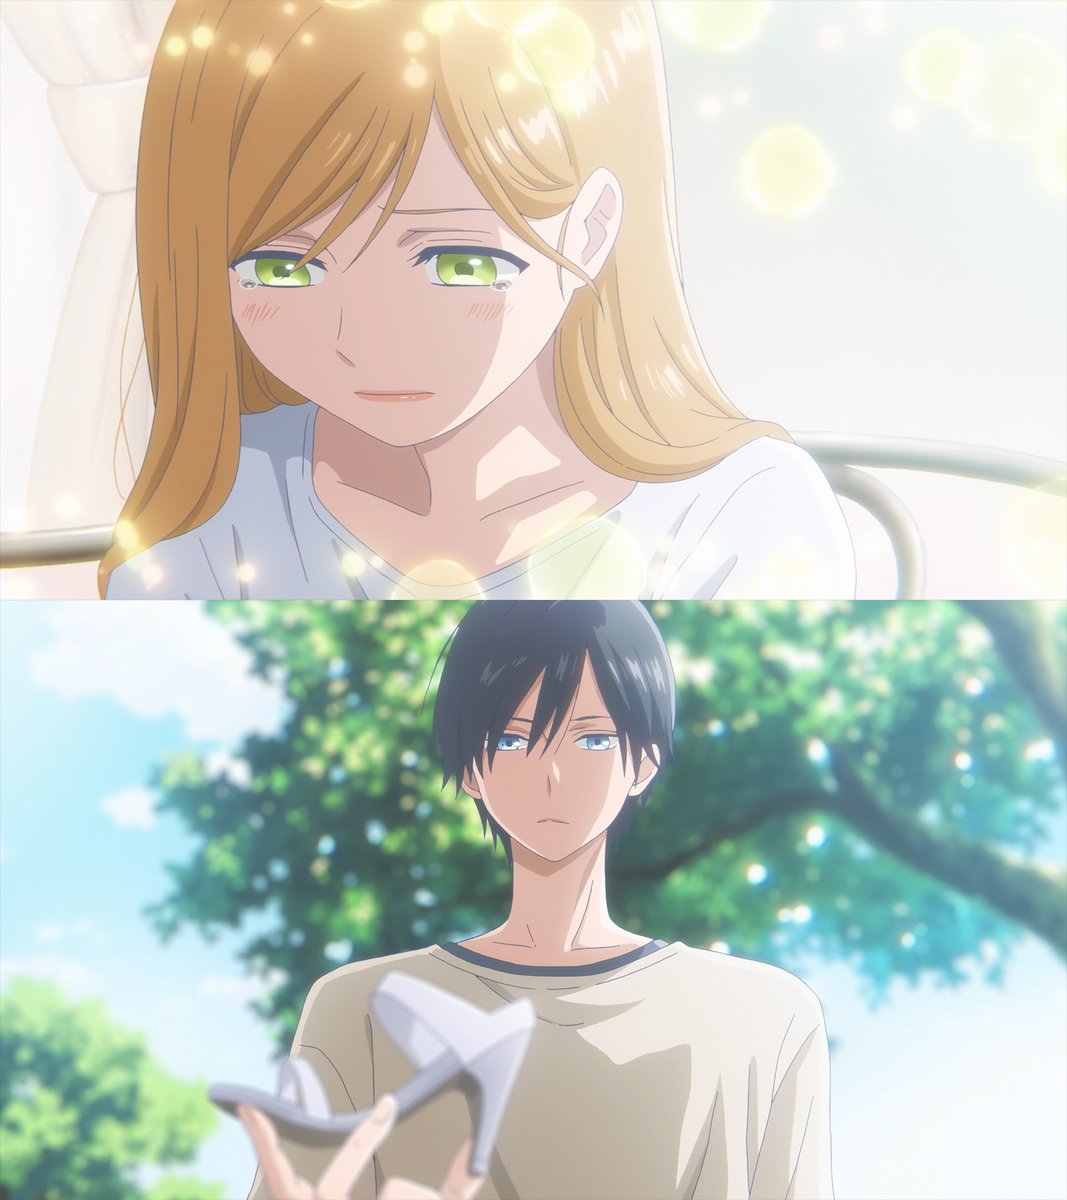 After getting her heart broken, Akane spills everything about her breakup to a stranger in-game, never expecting to meet him IRL. 😅 Akane - @AbbyTrott Yamada - @ThatStephenFu The English dub of My Love Story with Yamada-kun at Lvl999 premieres tomorrow, only on Crunchyroll!